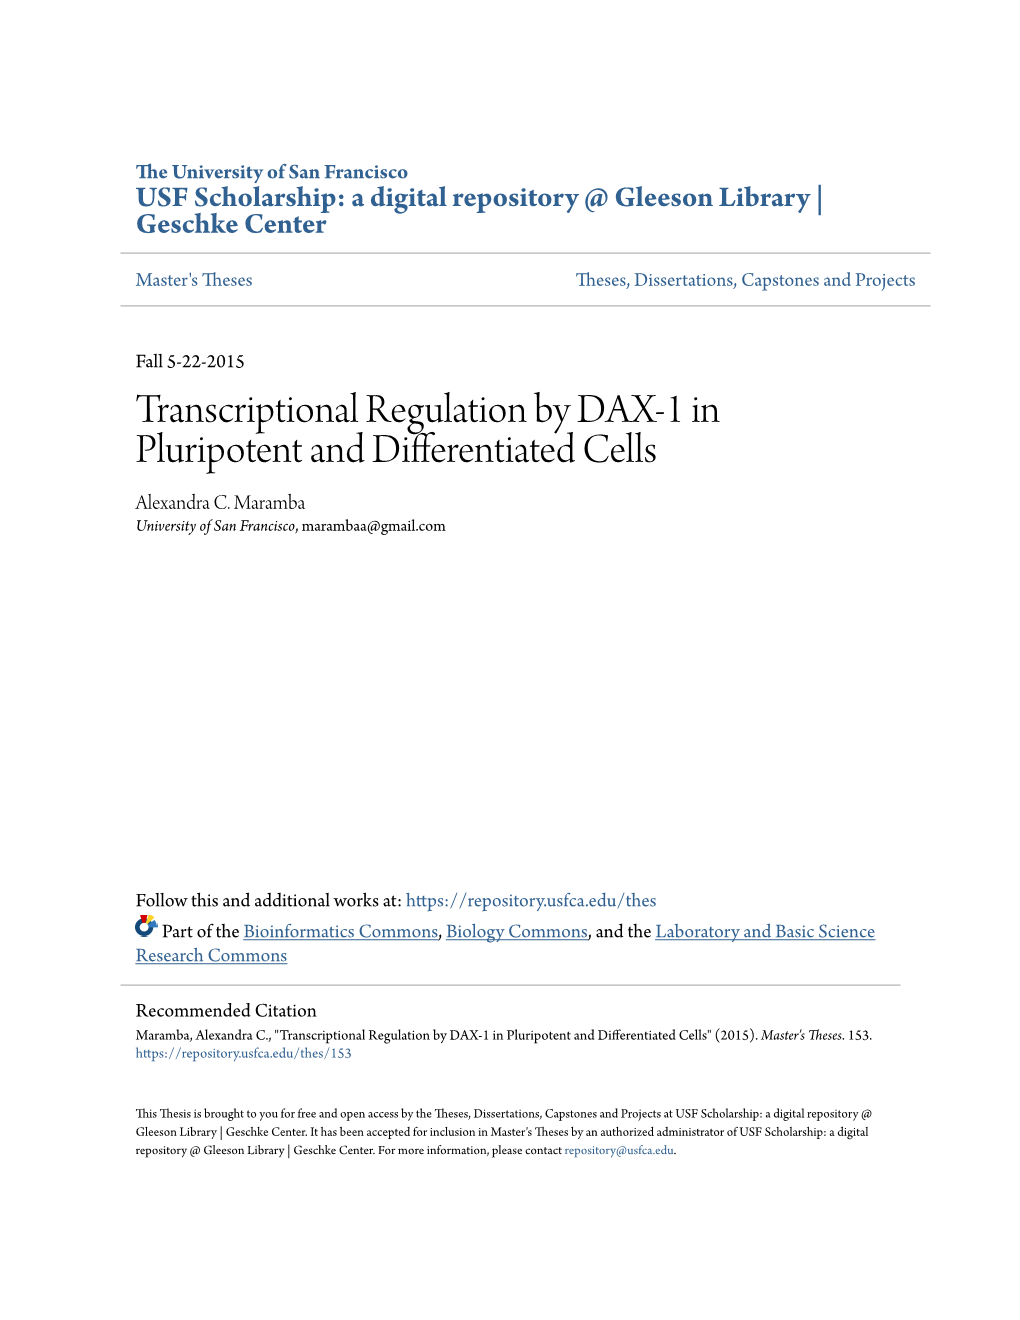 Transcriptional Regulation by DAX-1 in Pluripotent and Differentiated Cells Alexandra C